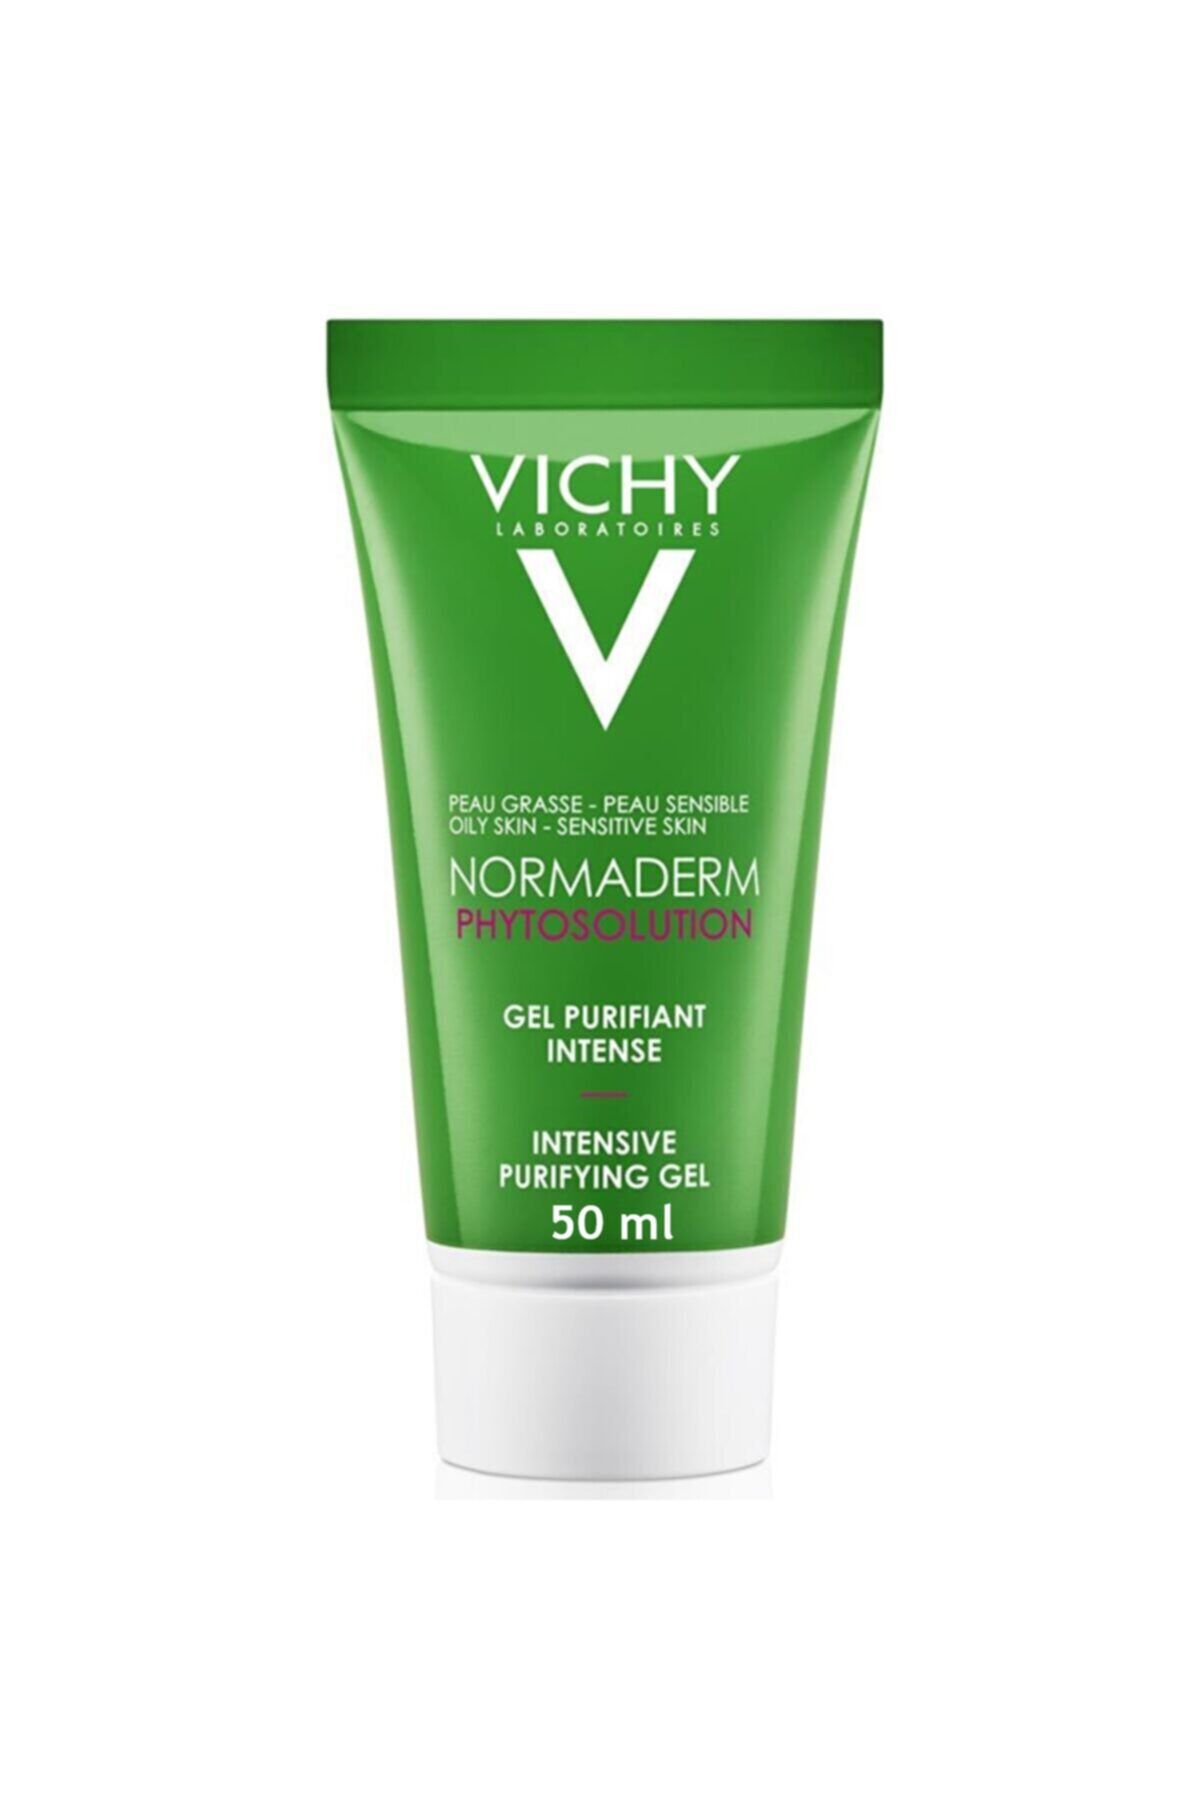 Normaderm gel purifiant intense. Виши Нормадерм phytosolution. Vichy Normaderm phytosolution крем. Vichy Normaderm phytosolution 1+1. Виши Нормадерм умывалка 50 мл.